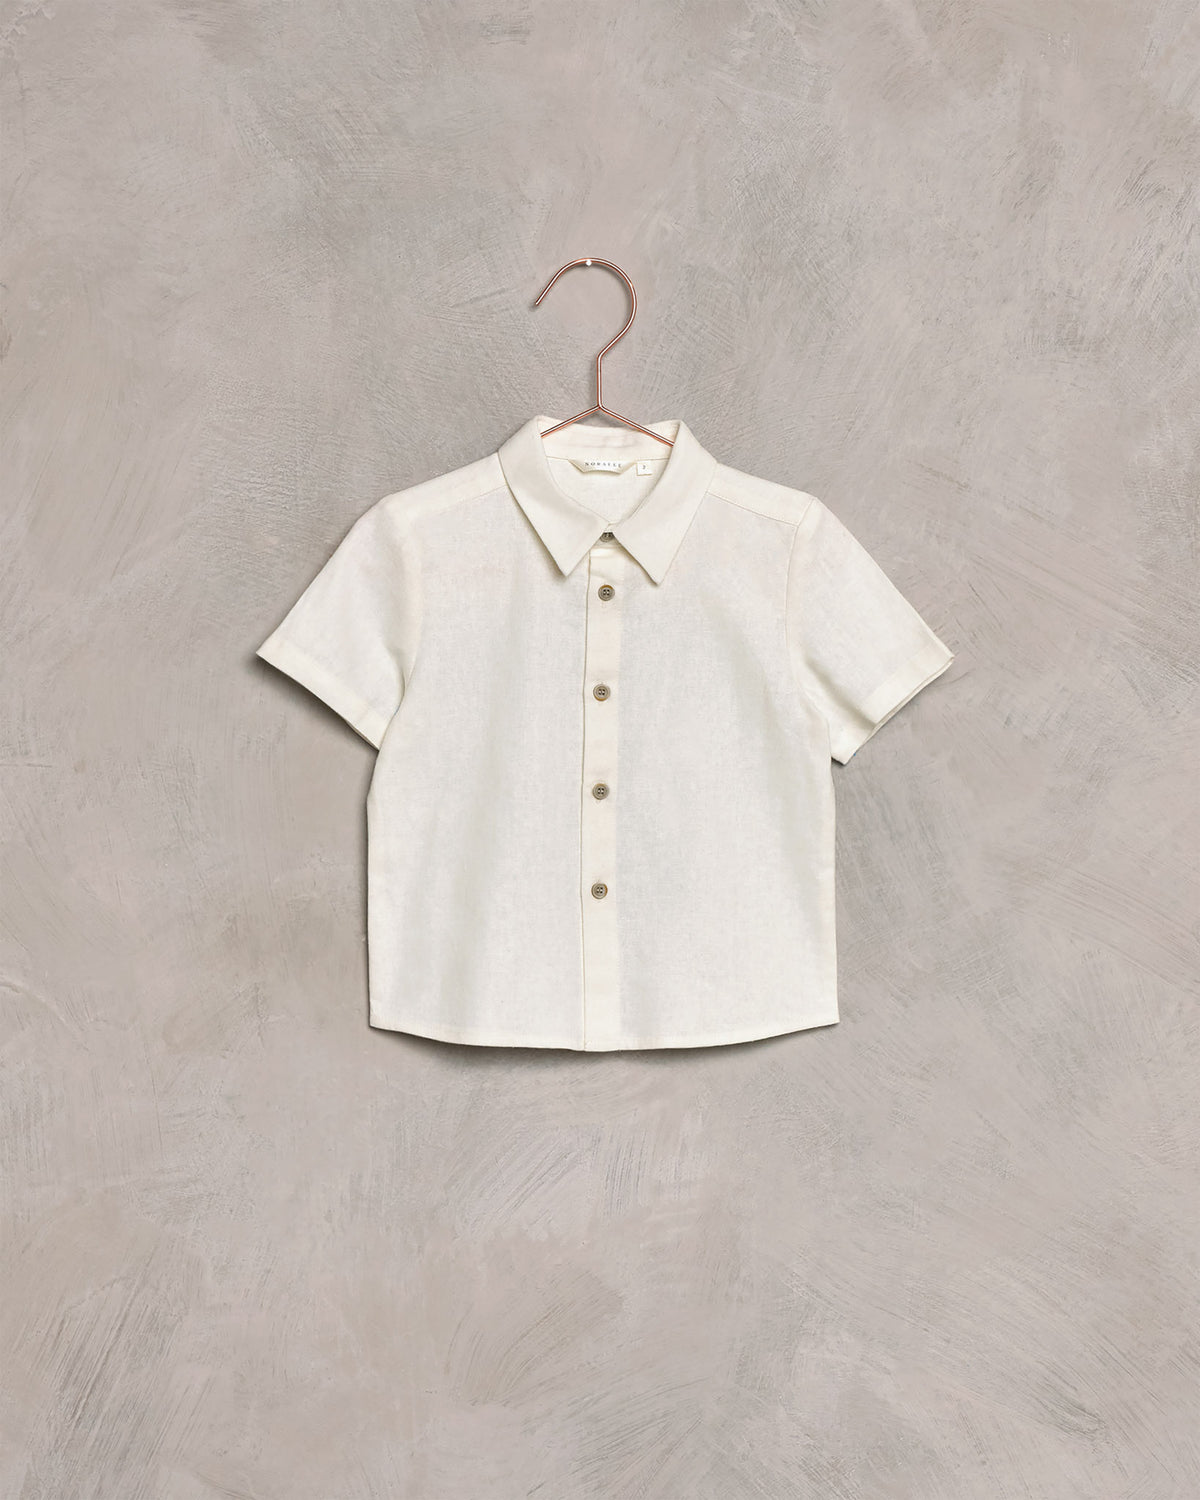 boys button up shirt in ivory color